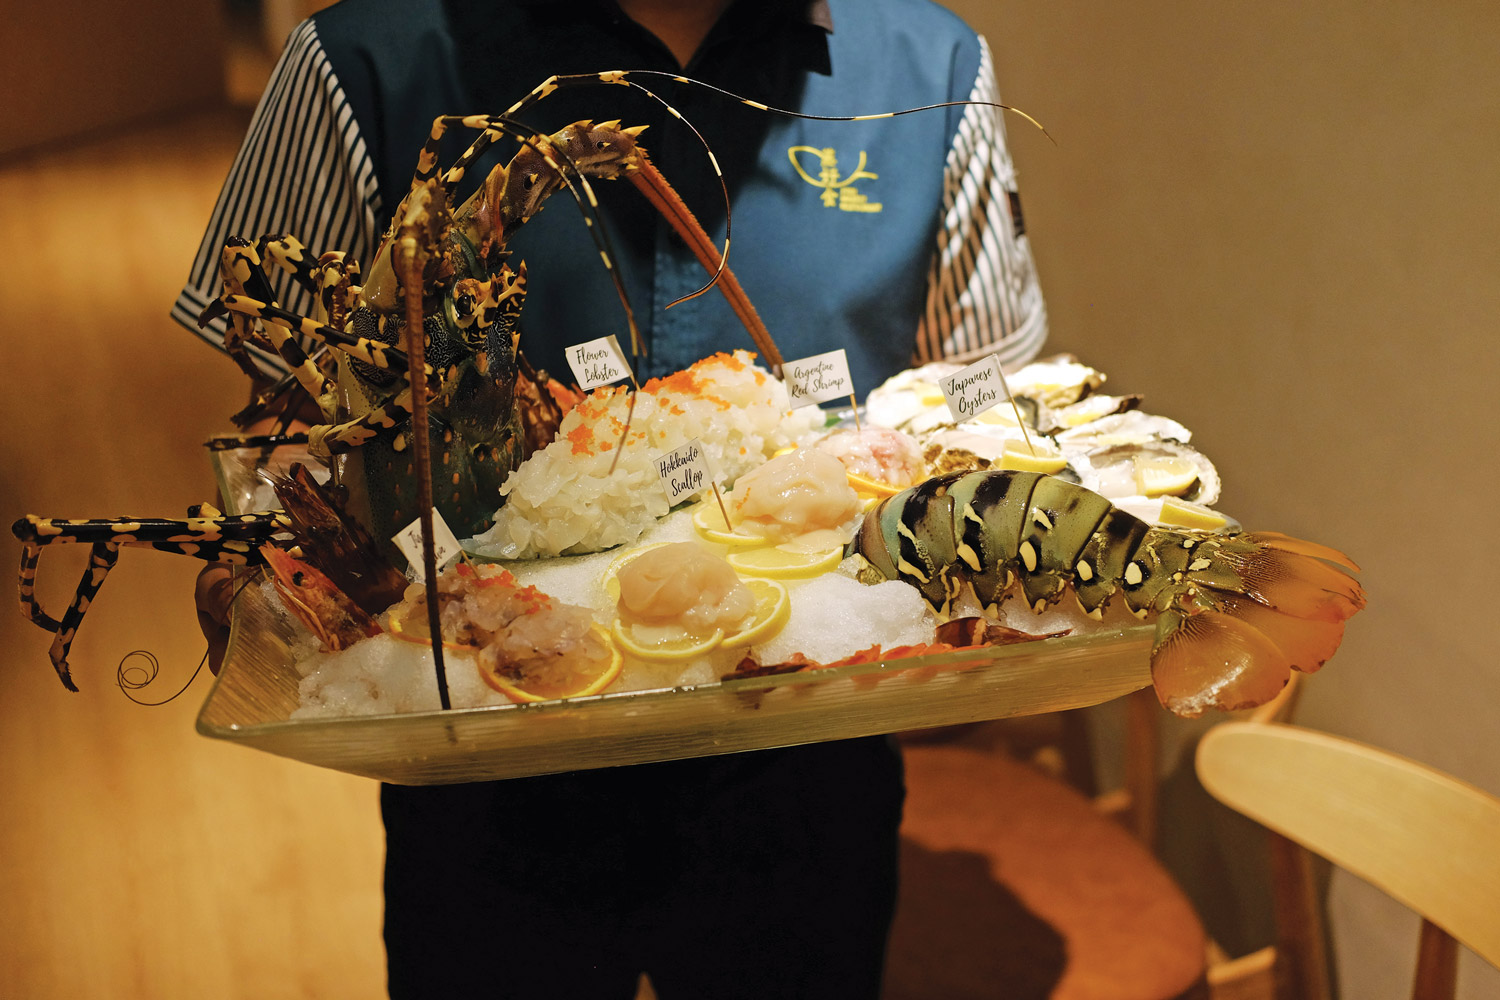 Fish Market Restaurant: Taste the natural delicacy of seafood